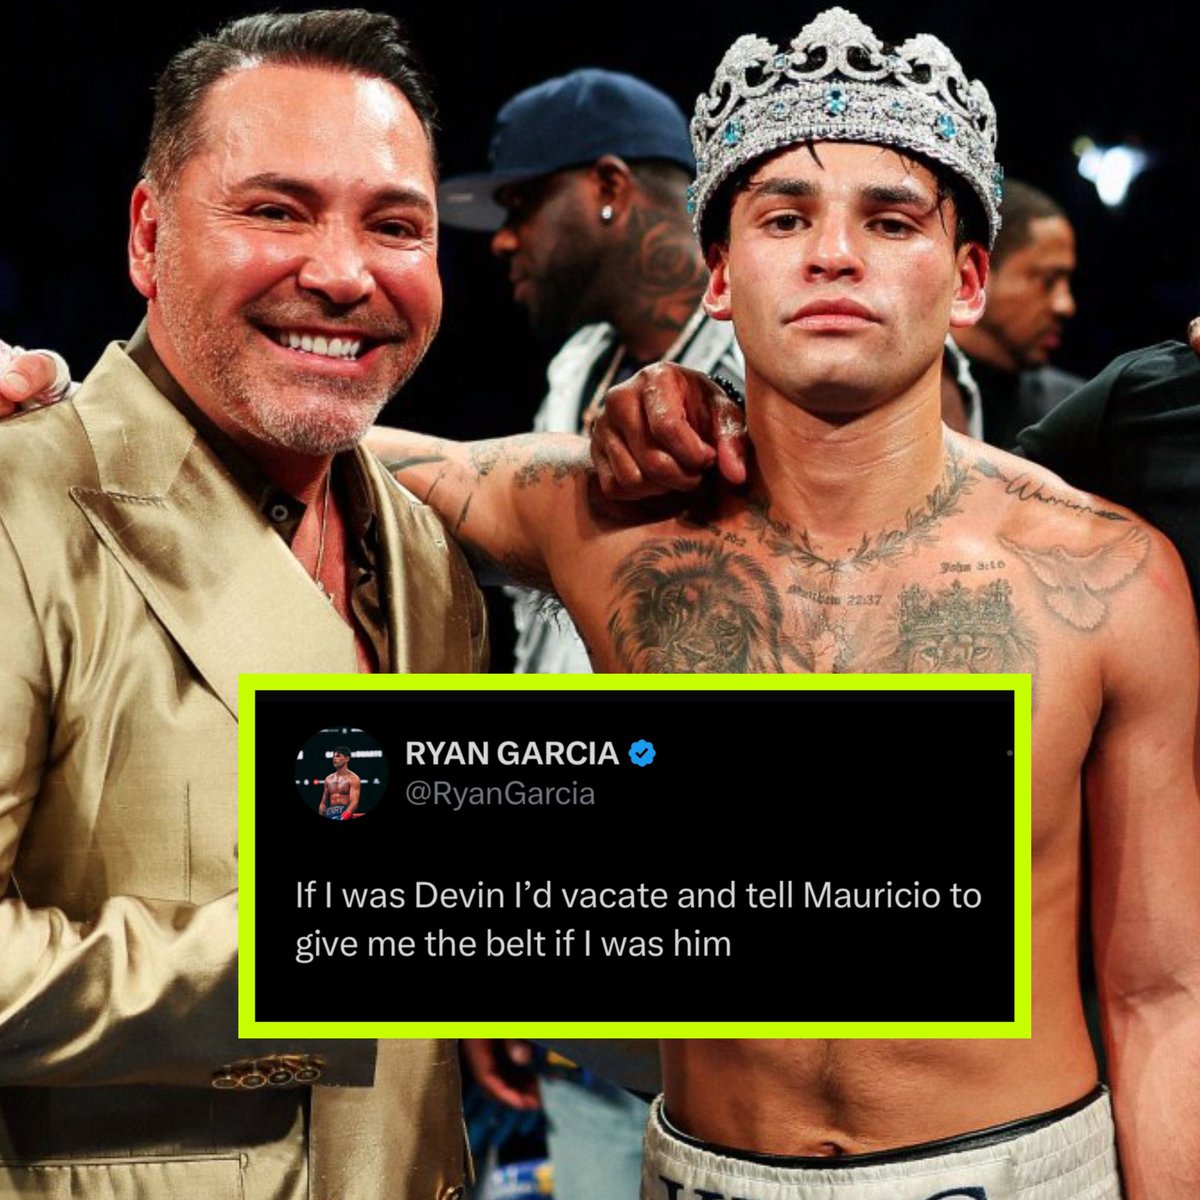 If I was Devin I would say fight me at 140lbs, beat me at 140lbs and then you can have a 140lbs world championship. #fightclub247 #boxing #fighter #garciahaney #ryangarcia #devinhaney #champion #forthefans